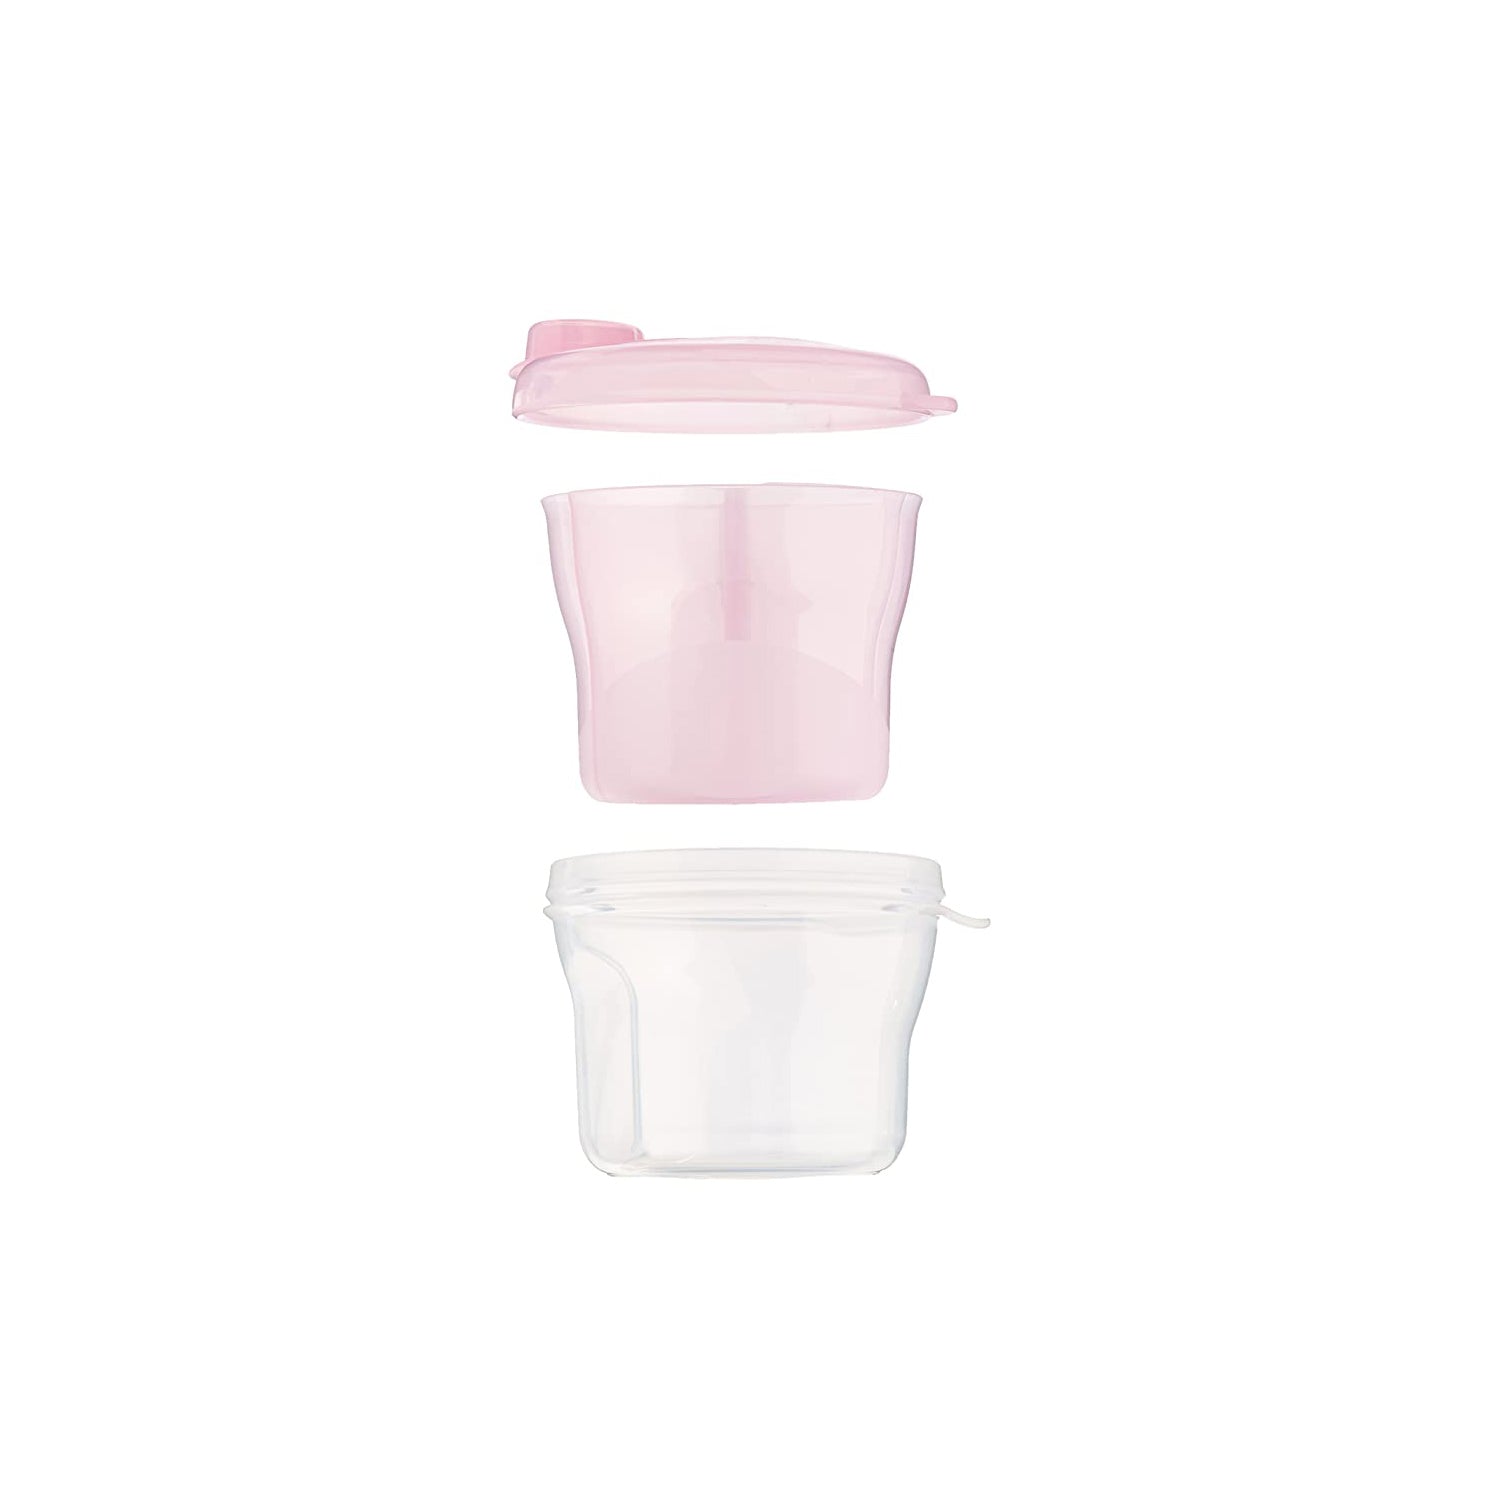 Phillips Avent BPA Free Formula Dispenser/Snack Cup, Colors May Vary